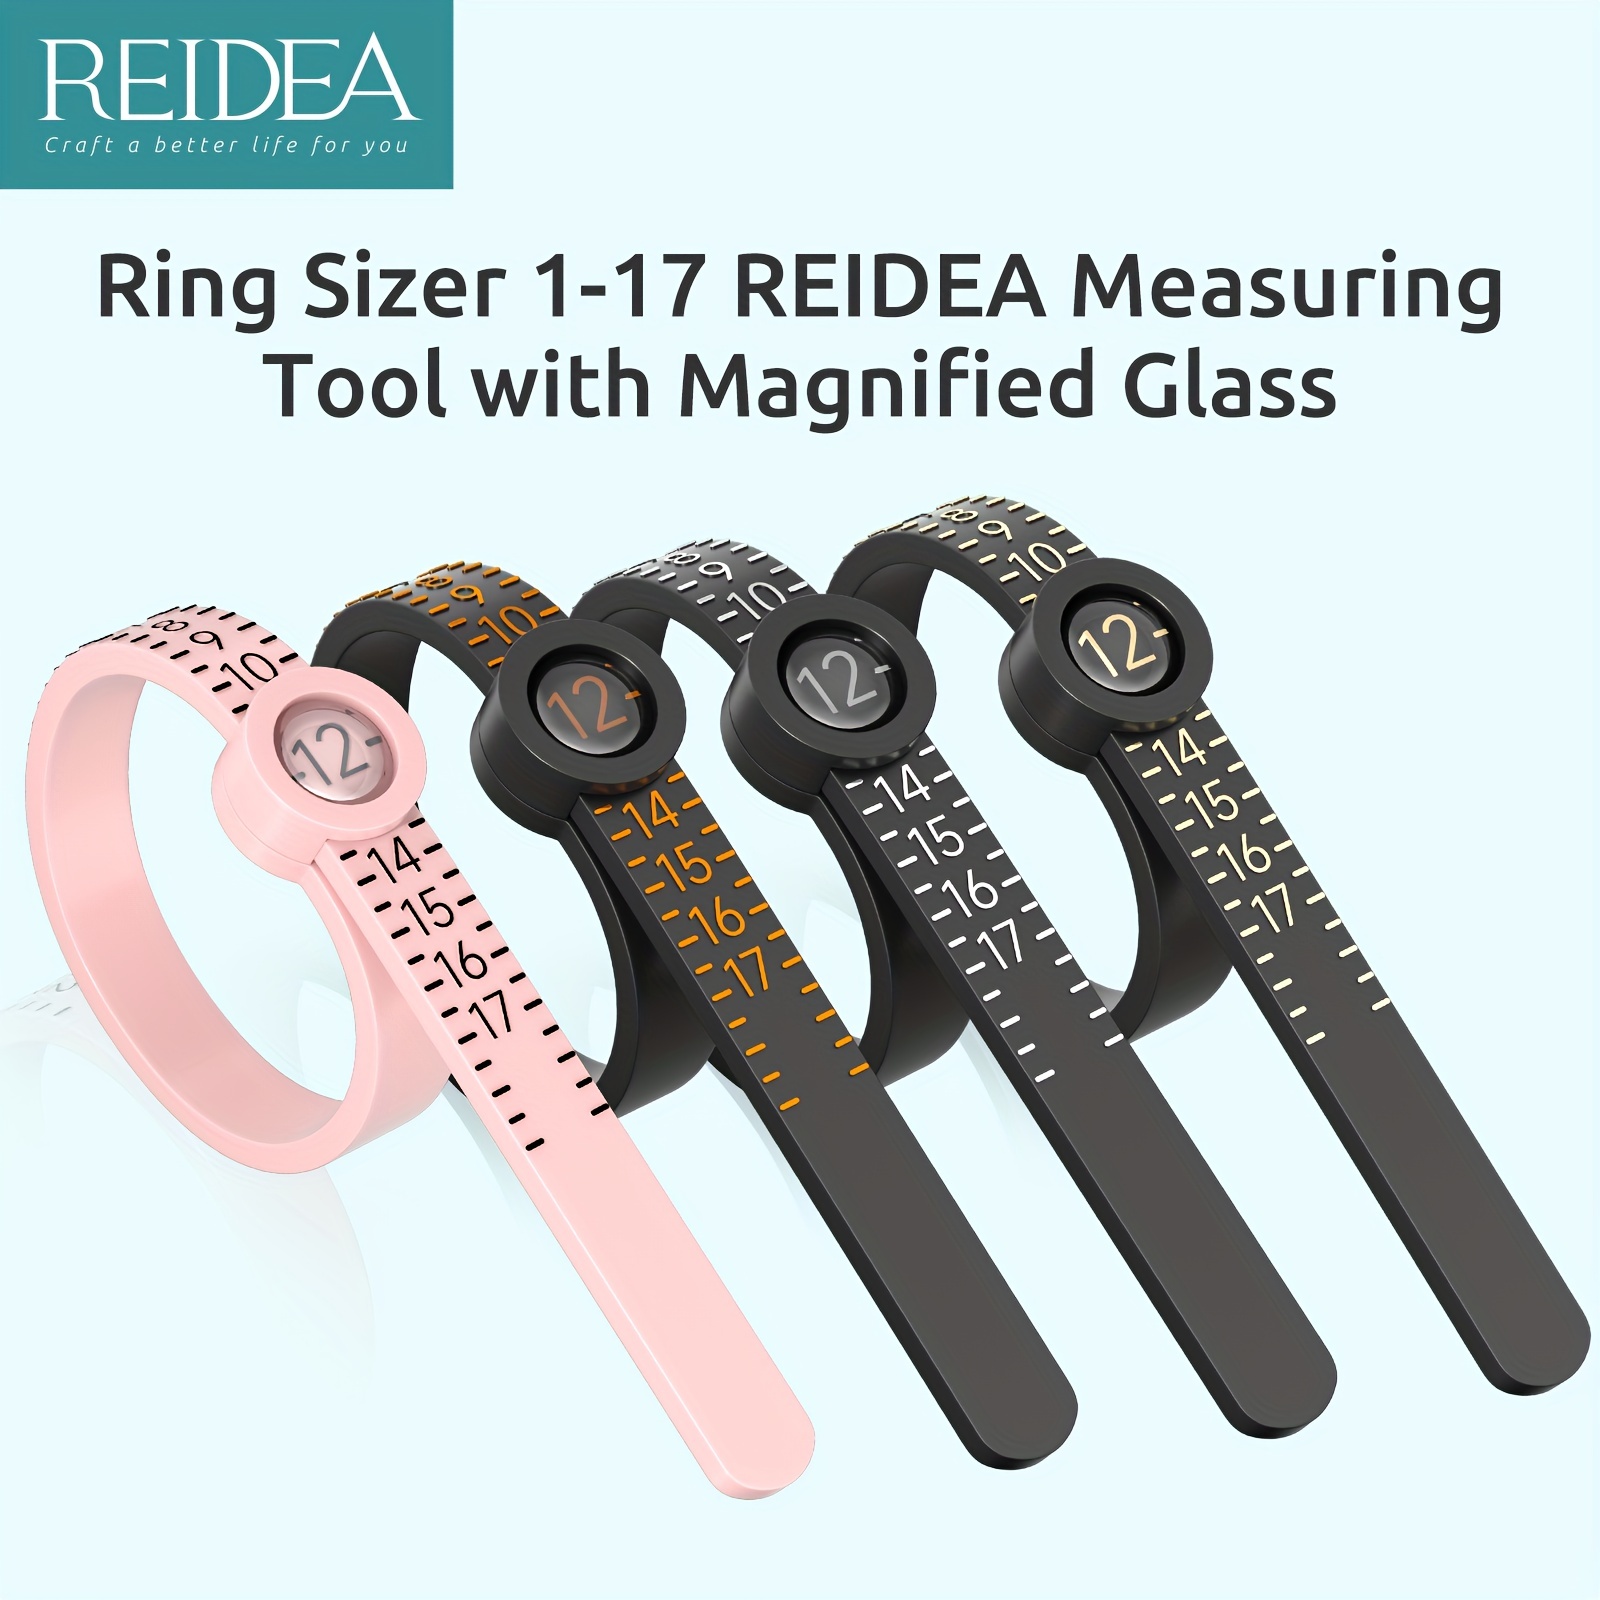 50pcs Ring Sizer Set - Measure Your Ring Size Accurately from 1-17 US Sizes  - Reusable Plastic Jewelry Sizing Tool for Women & Men